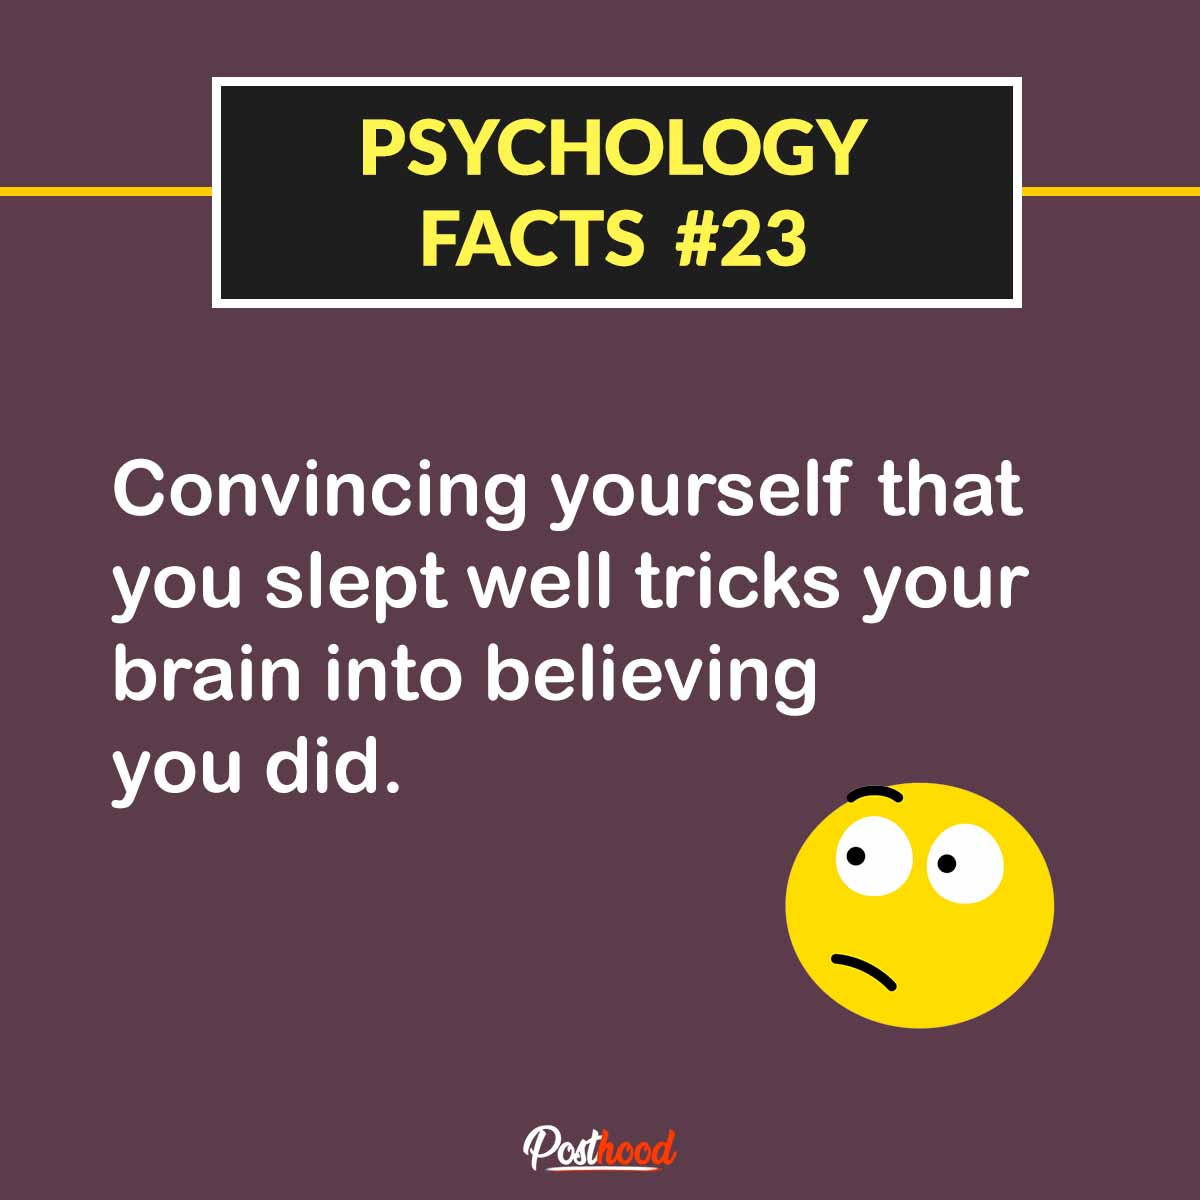 100 fun and interesting Psychological facts about human mind and behavior. Explore some craziest things about human psychology.